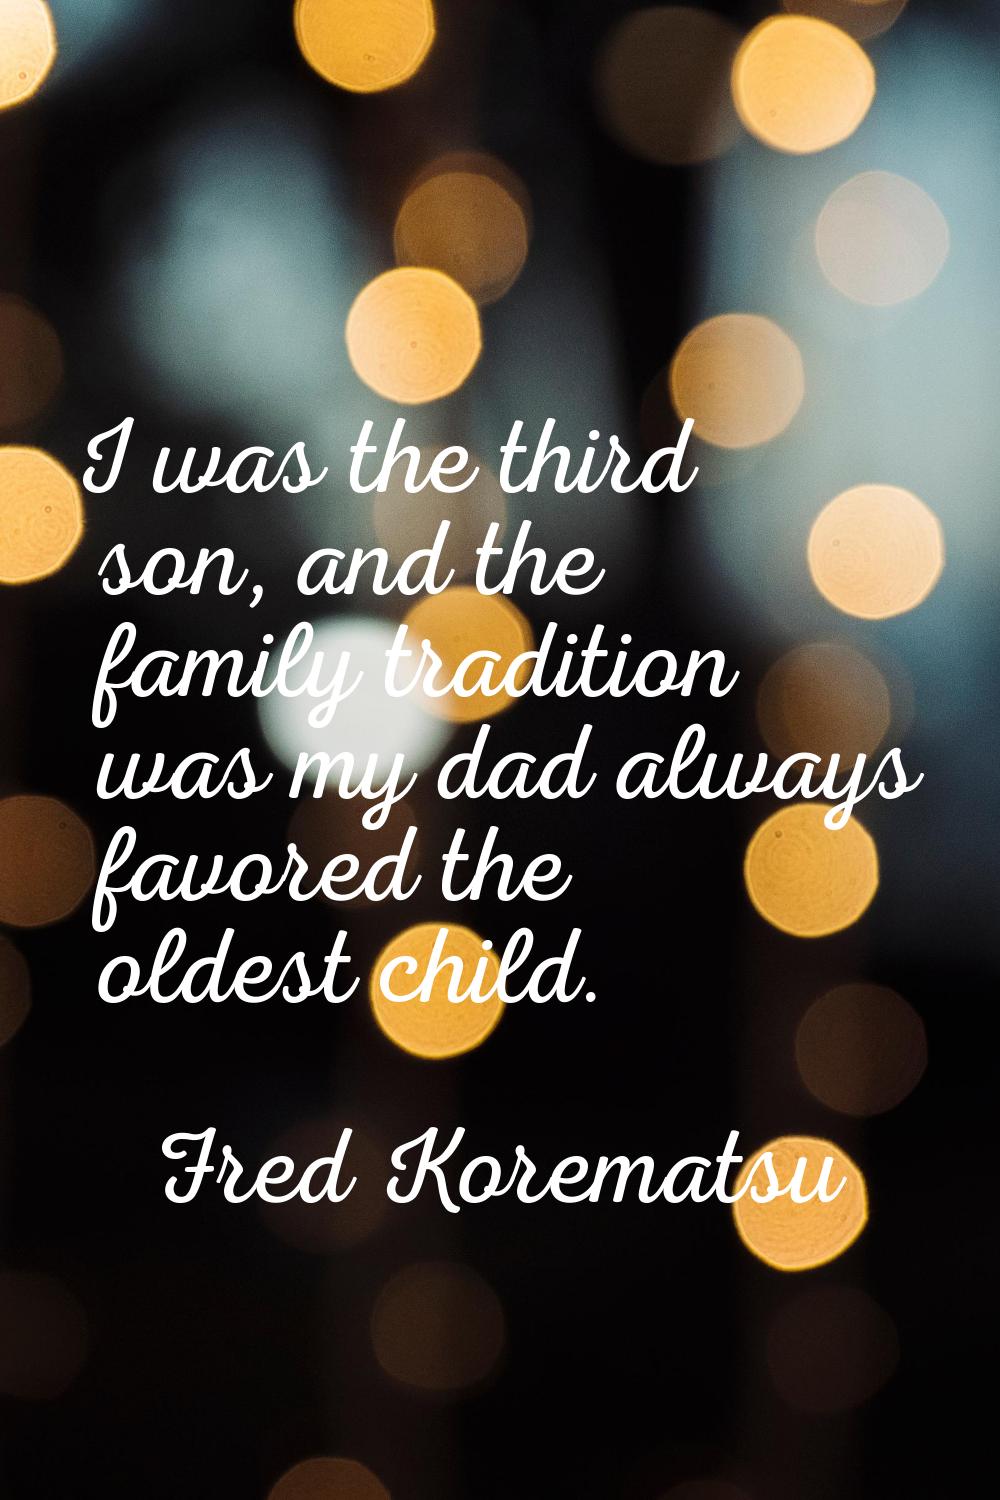 I was the third son, and the family tradition was my dad always favored the oldest child.